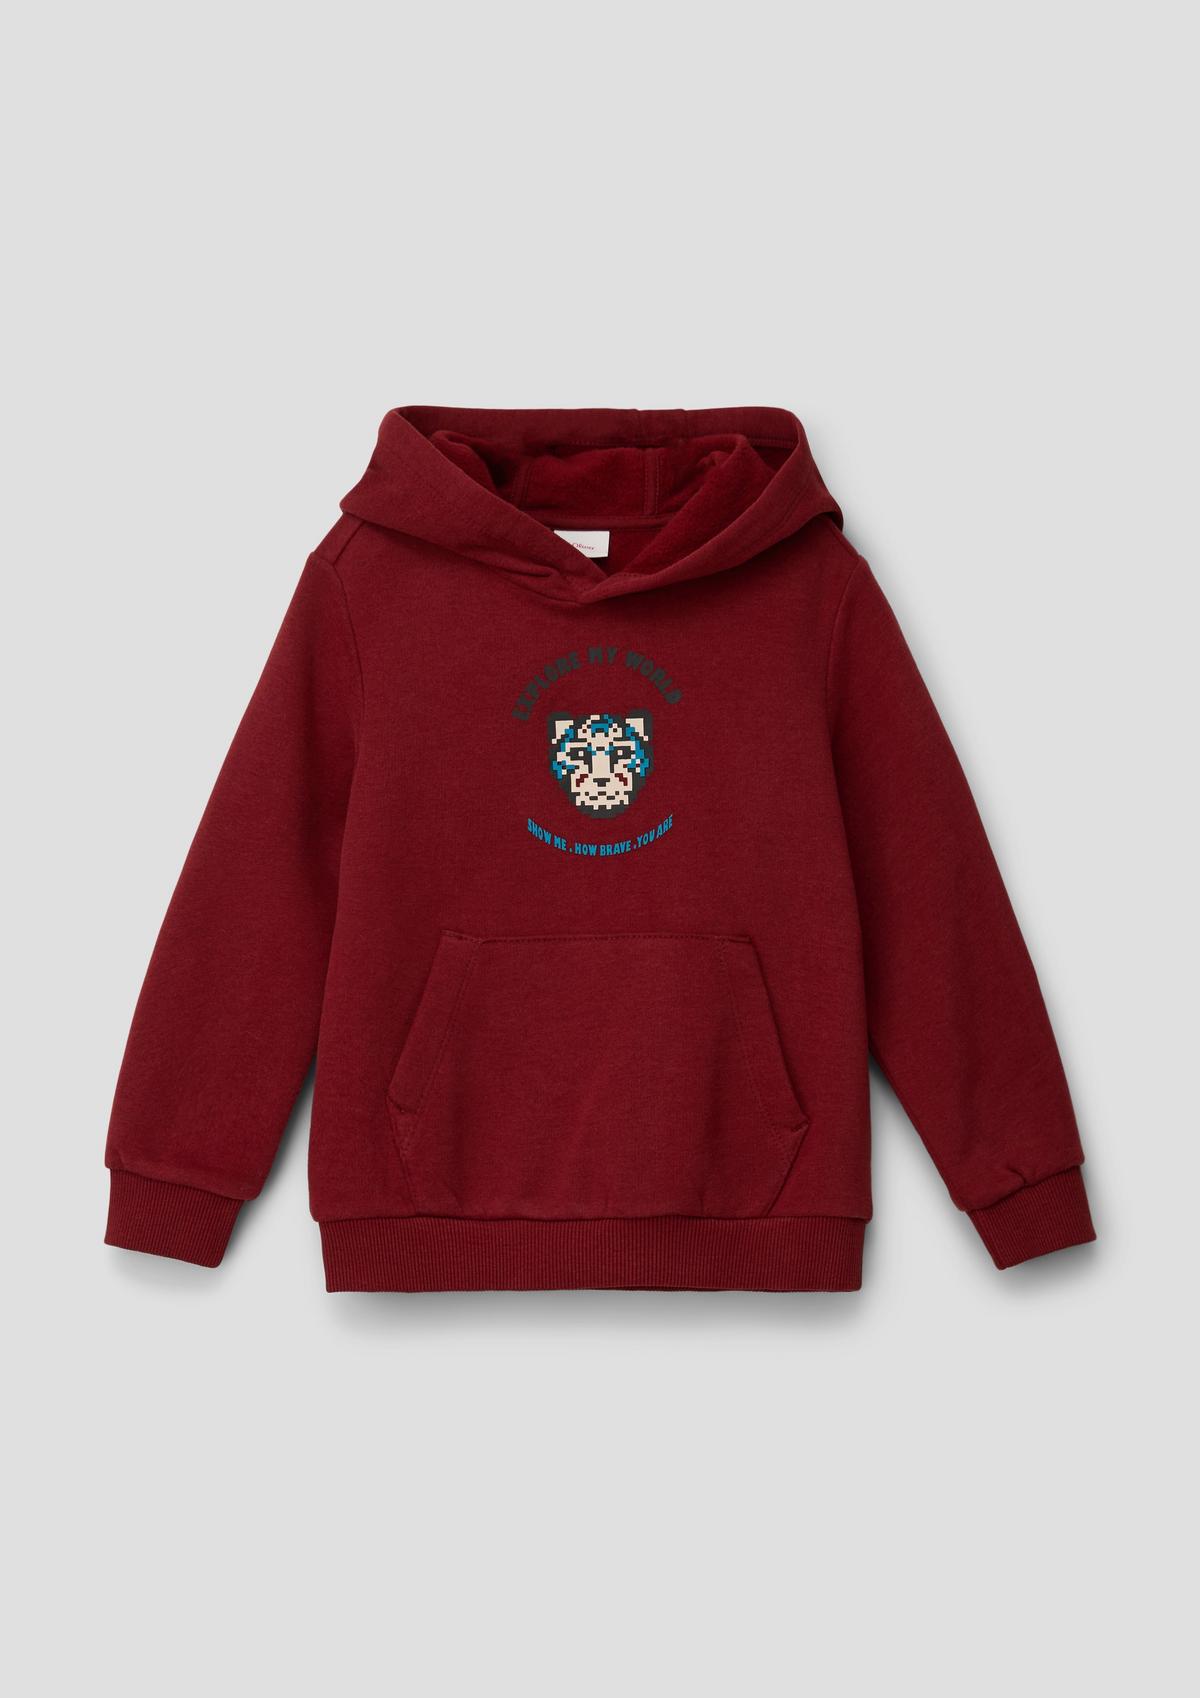 and boys Sweatshirts online knitwear for